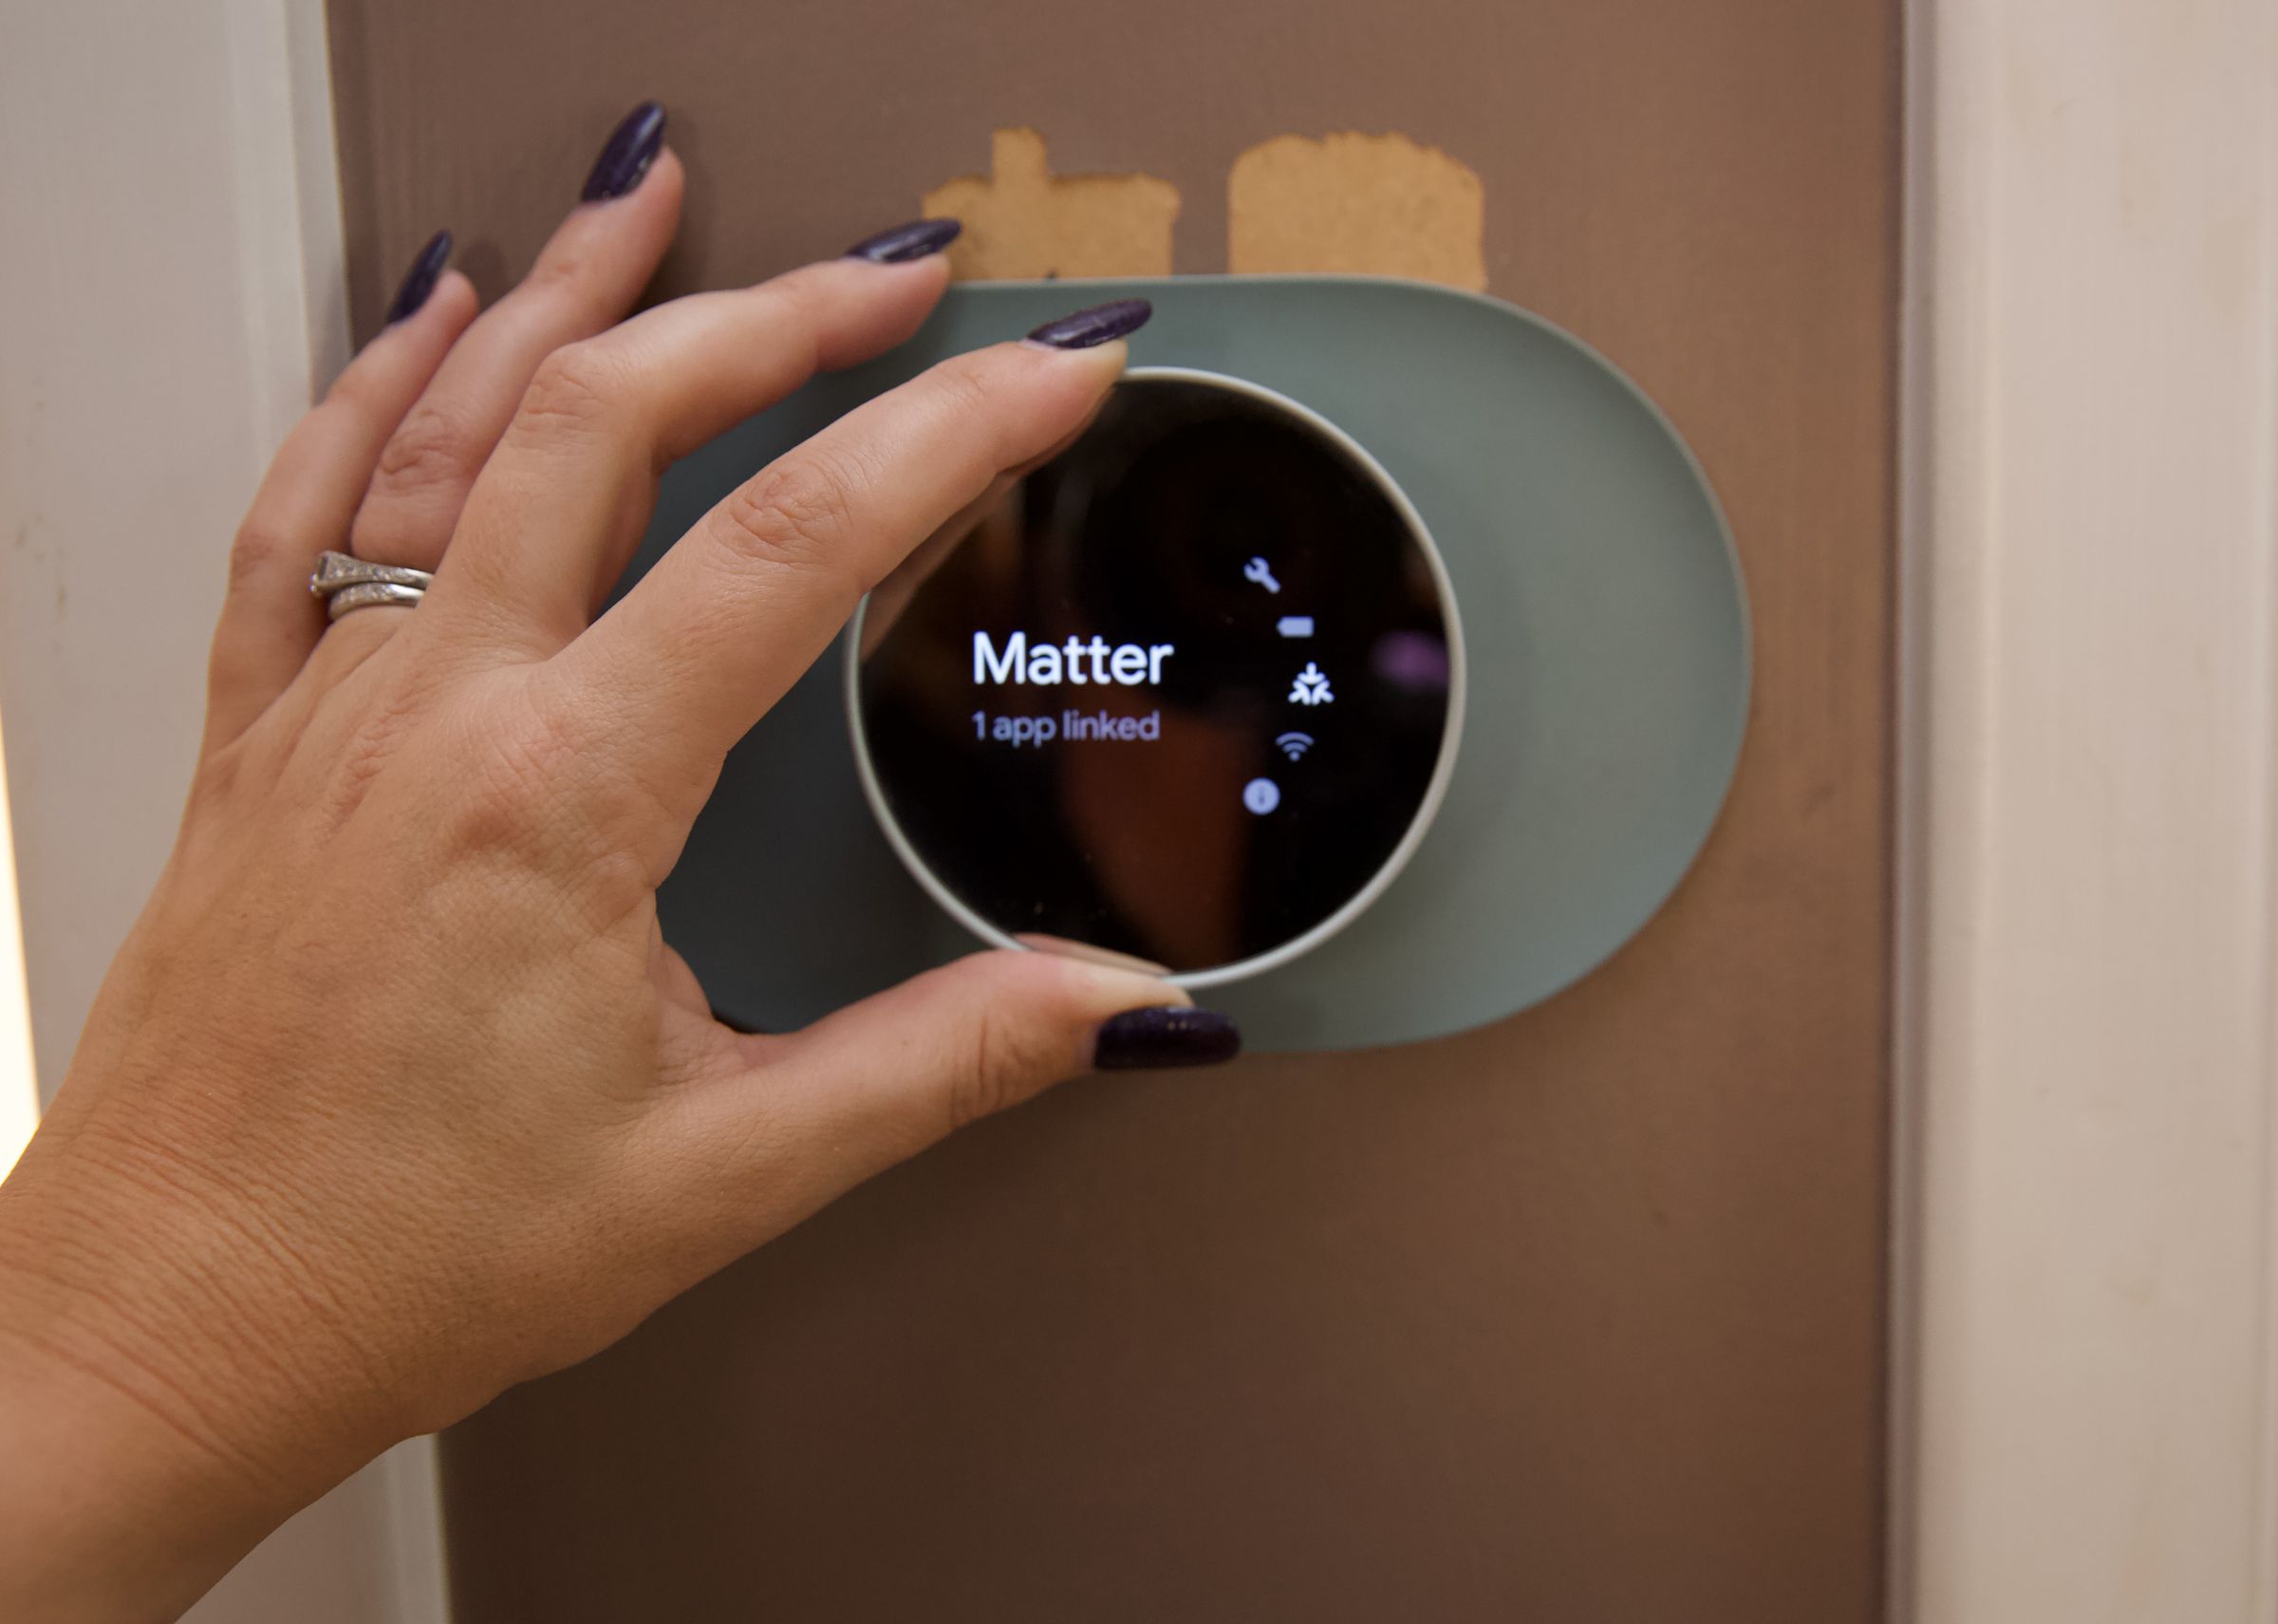 The Nest Thermostat is Matter compatible and can be linked to any Matter smart home platform.